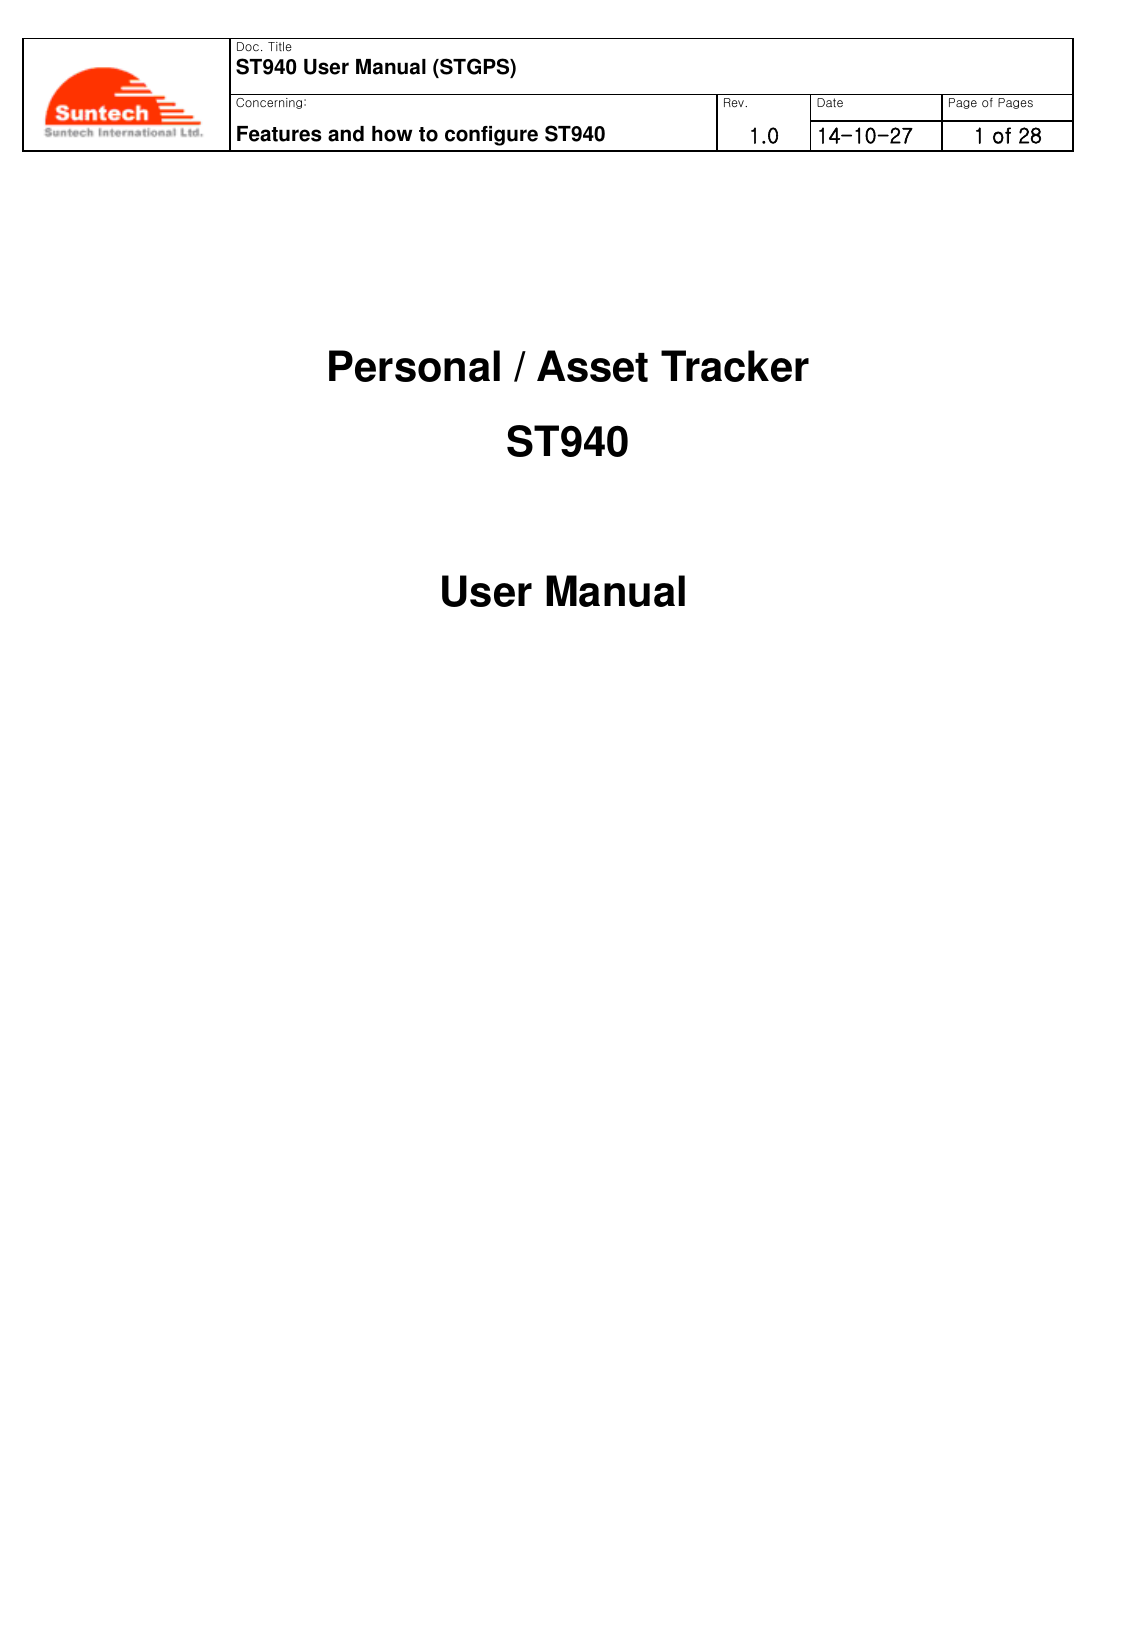   Doc. Title ST940 User Manual (STGPS) Concerning: Rev. Date Page of Pages Features and how to configure ST940 1.0 0      14-10-27 1 of 28      Personal / Asset Tracker   ST940  User Manual           